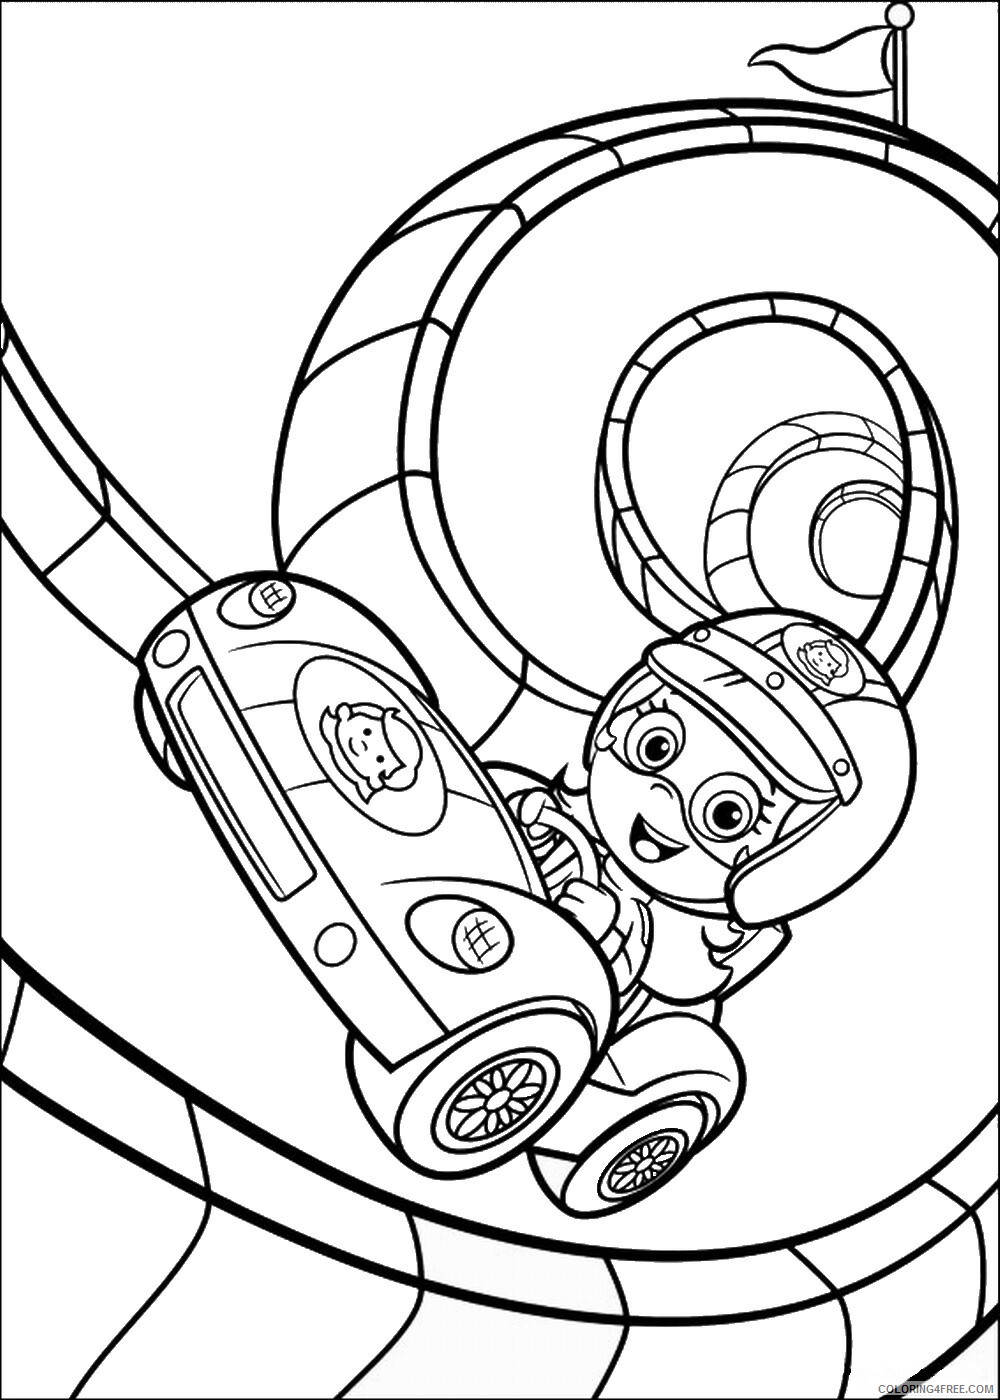 Bubble Guppies Coloring Pages TV Film Free Bubble Guppies Printable 2020 01667 Coloring4free